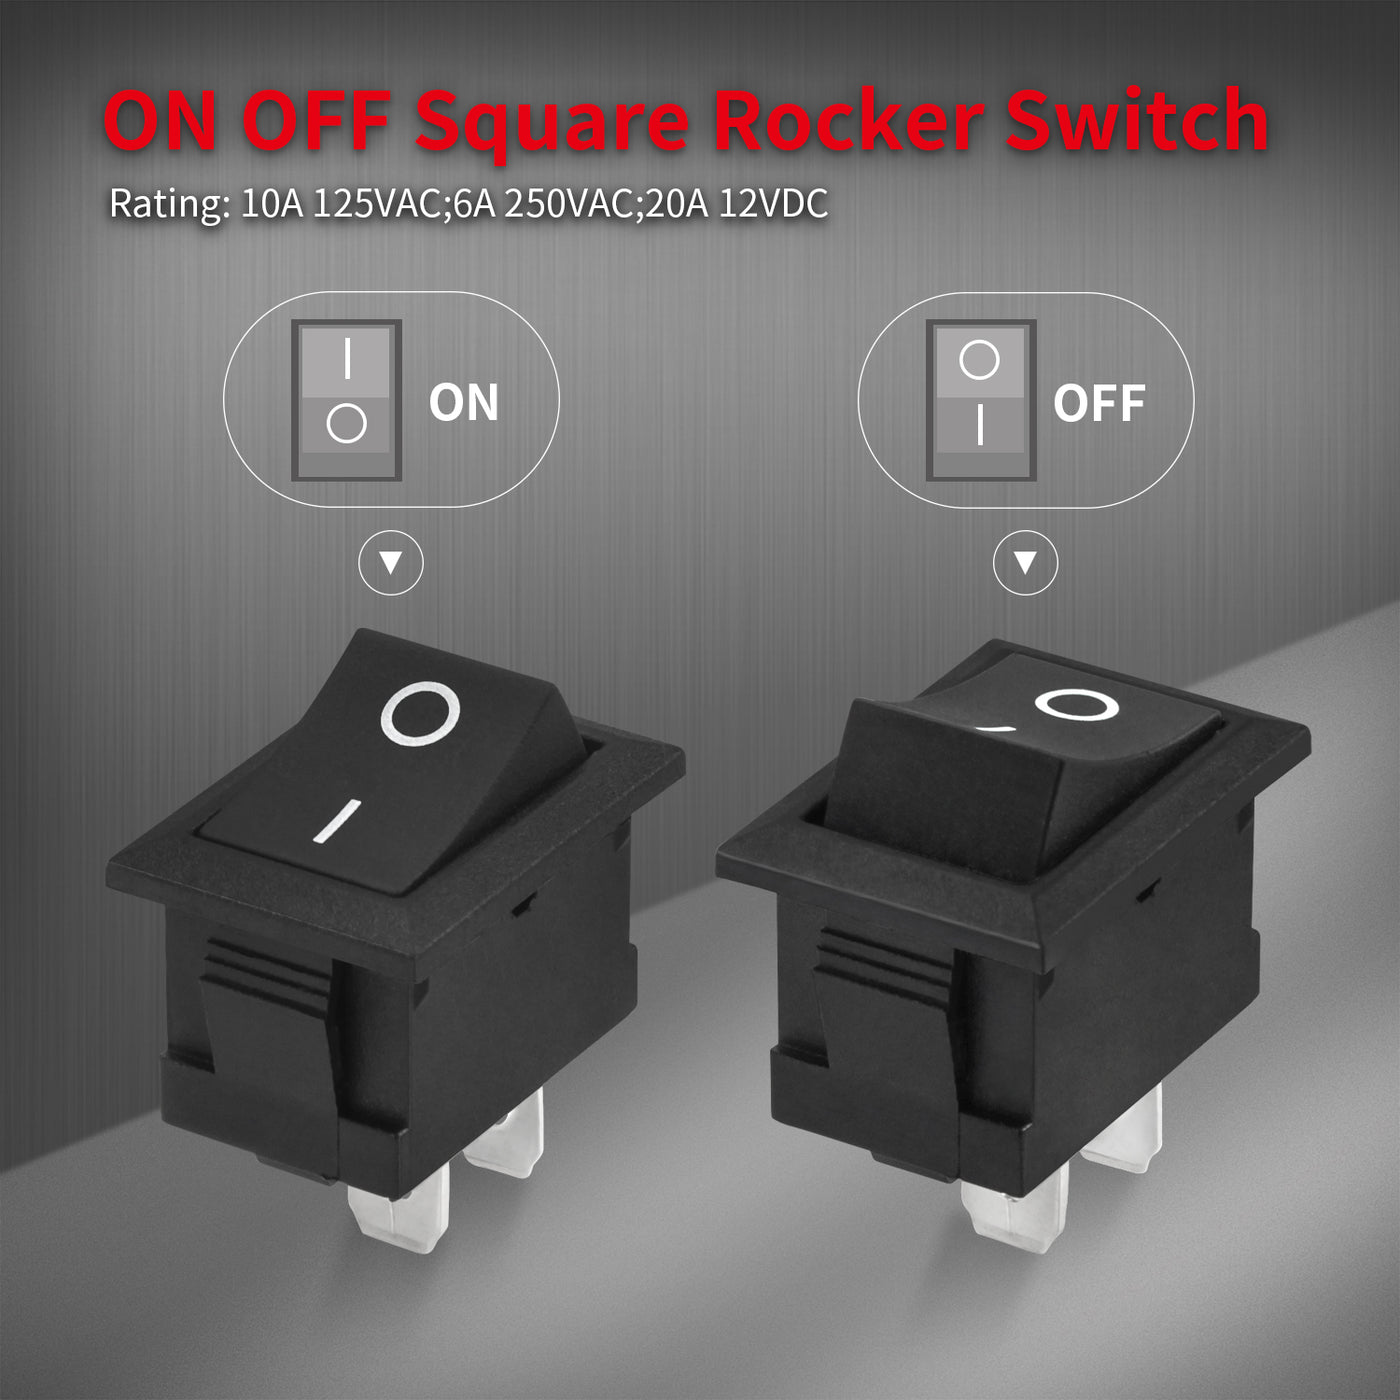 KCD1-101 ON-OFF Square Rocker Switch